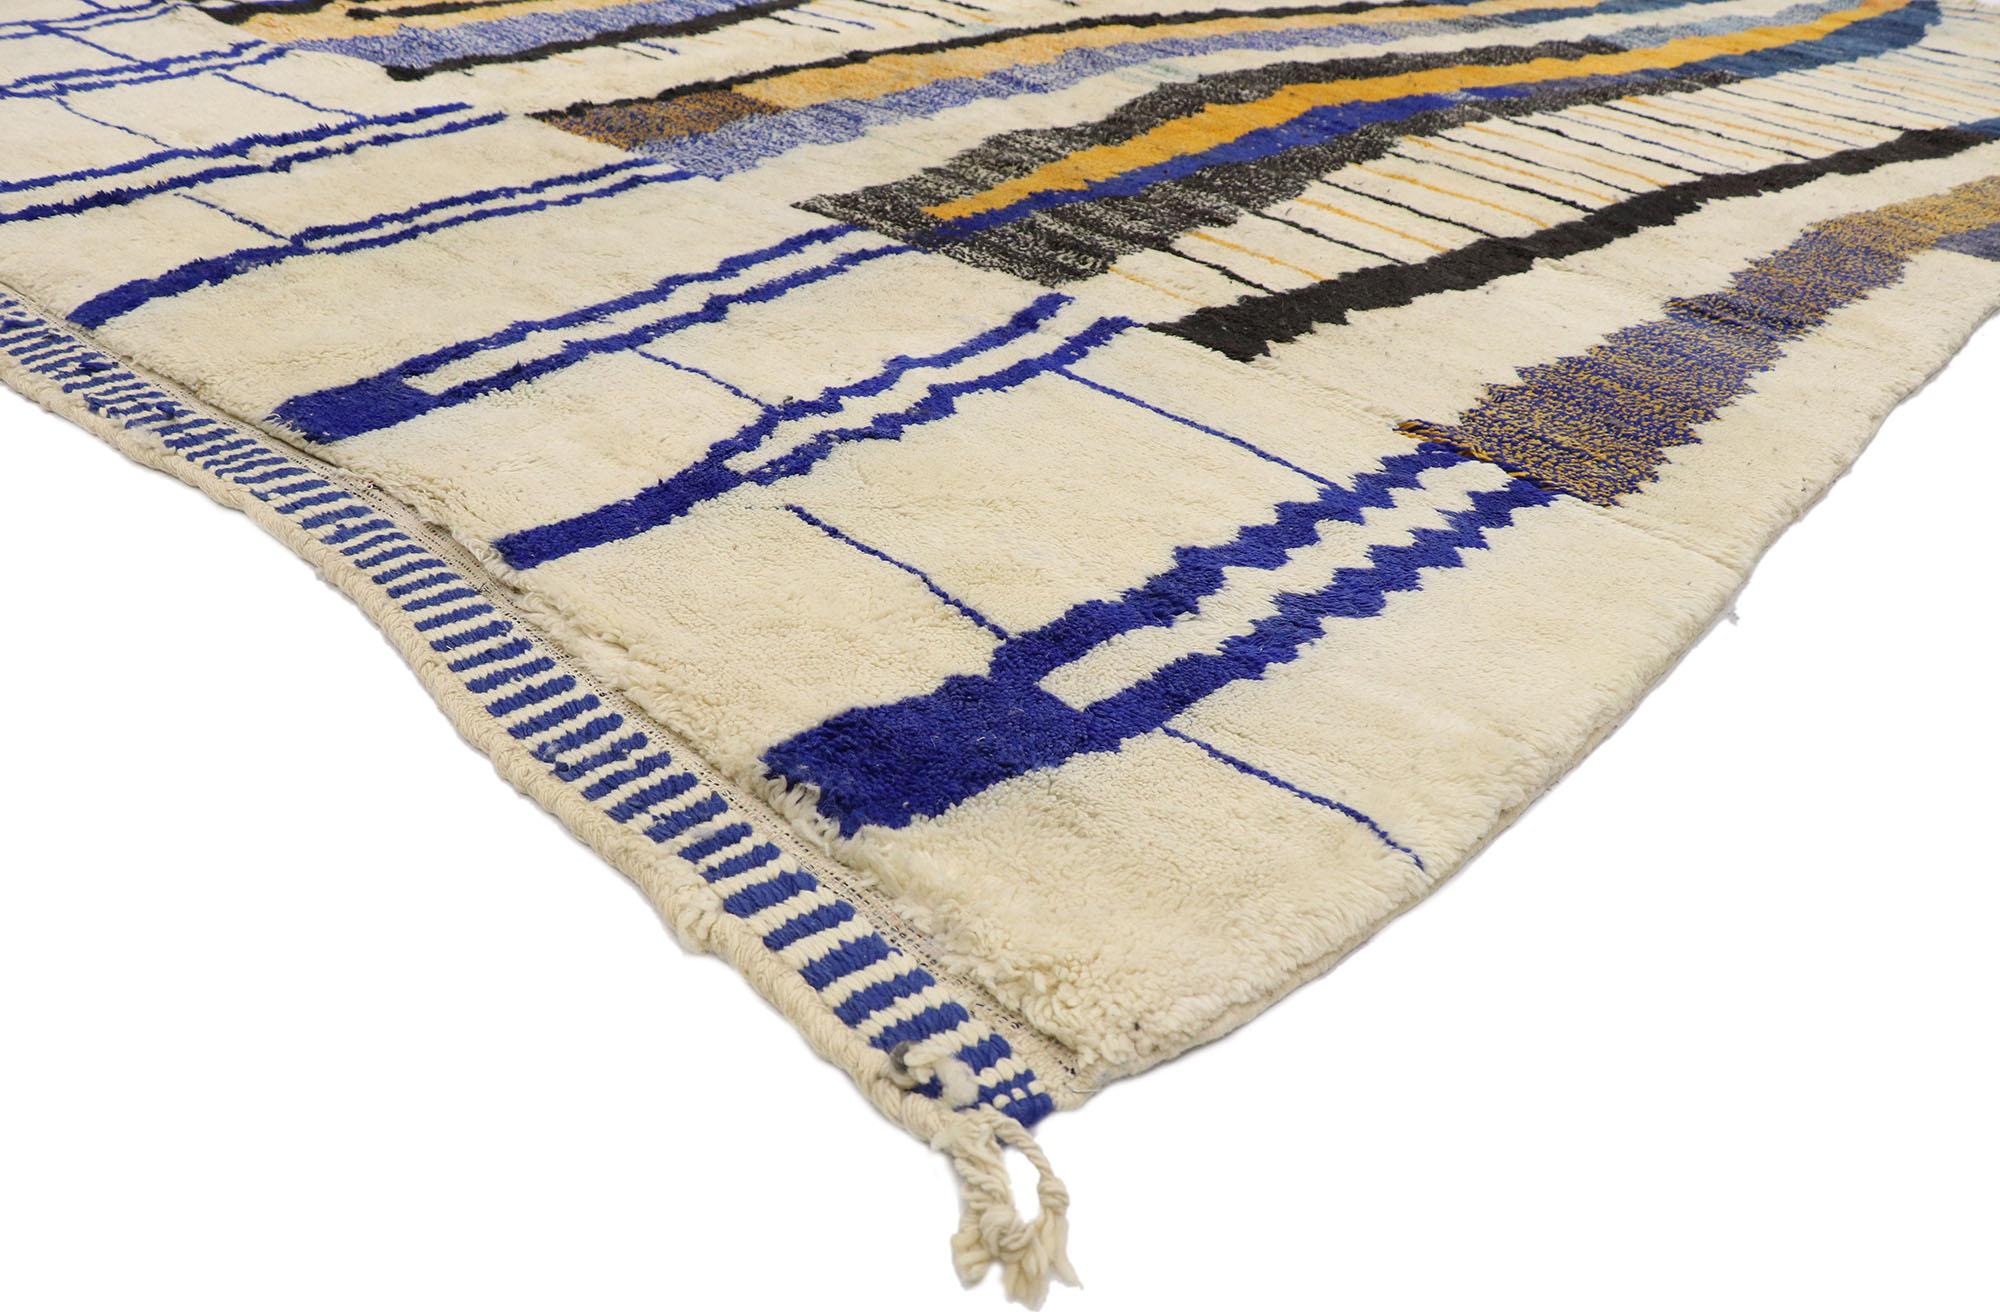 21116 Authentic Large Abstract Moroccan Rug, 10'05 x 12'10.
Reflecting elements of linear abstract style with incredible detail and lavish texture, this hand knotted wool Berber Moroccan rug is engaging, yet well-balanced. The visual complexity and